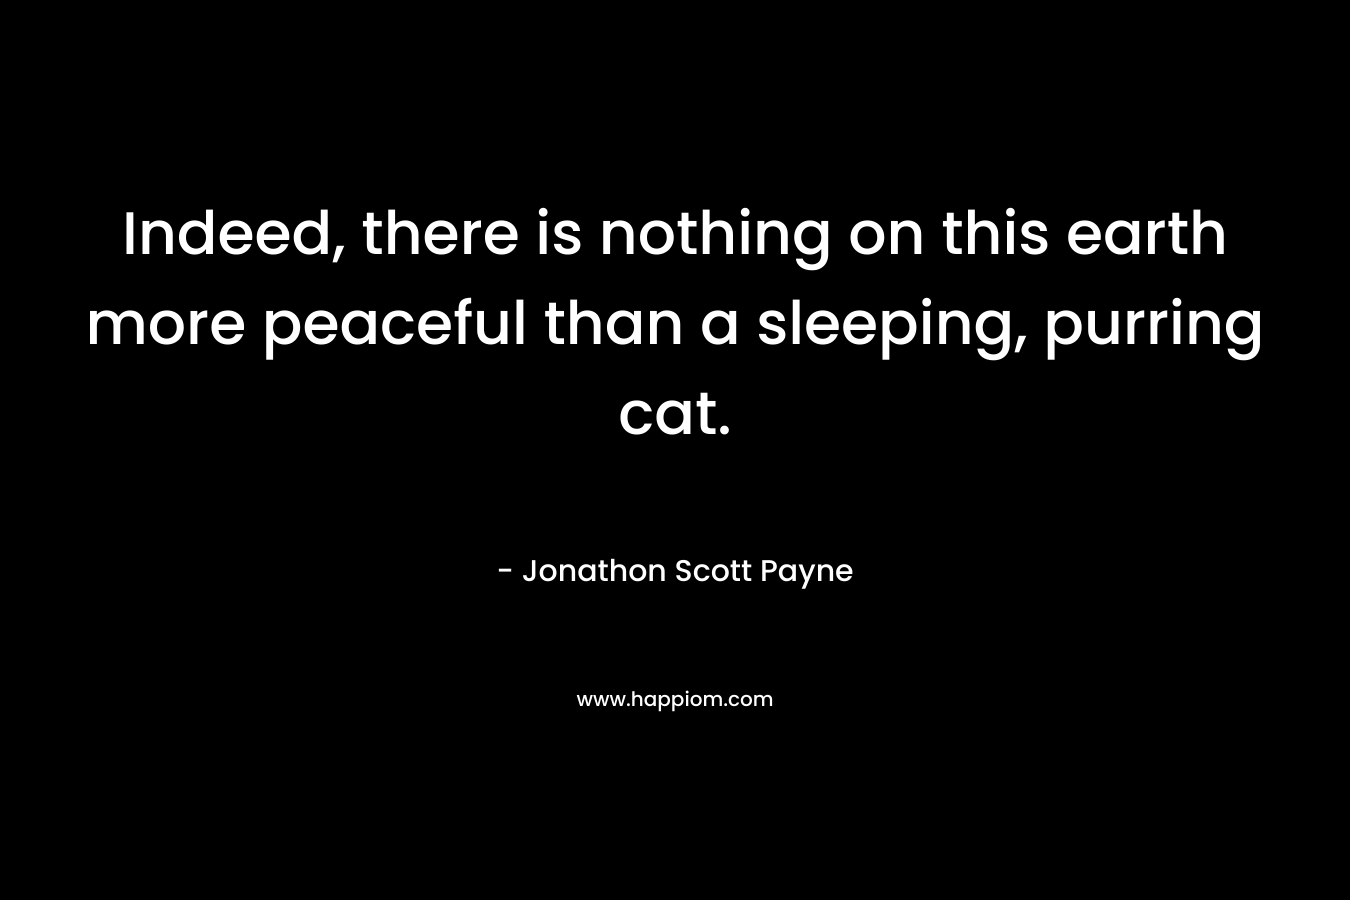 Indeed, there is nothing on this earth more peaceful than a sleeping, purring cat. – Jonathon Scott Payne